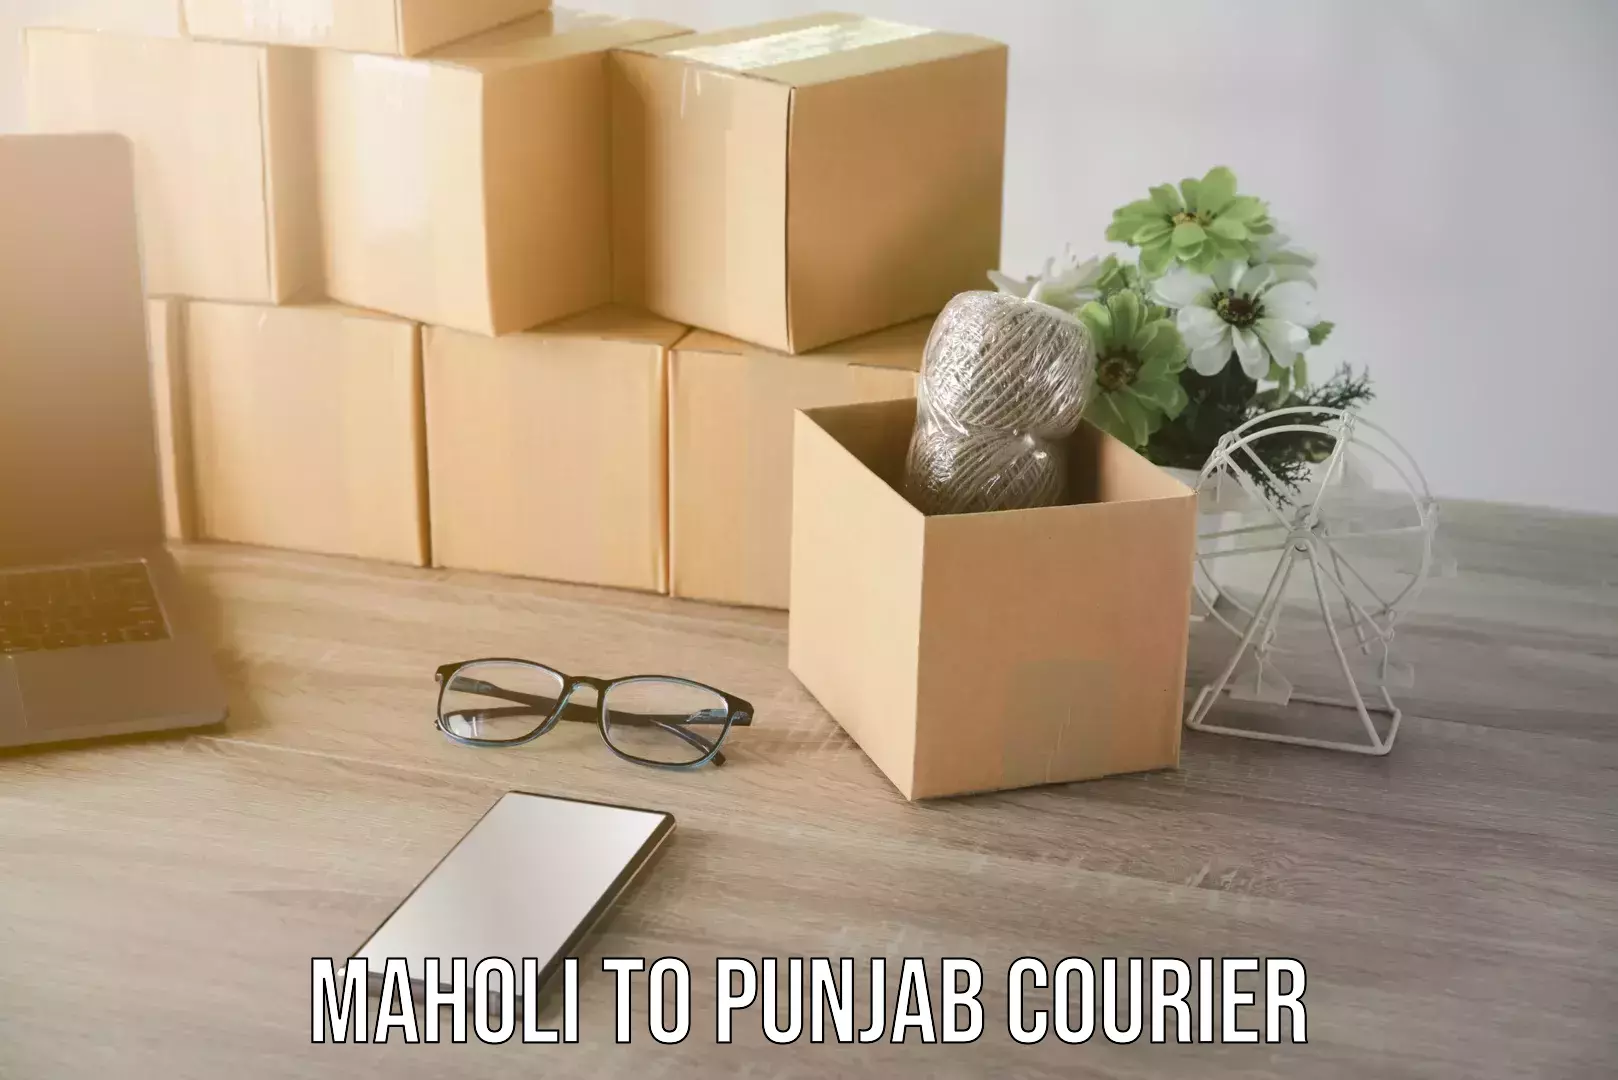 Quality relocation services Maholi to Punjab